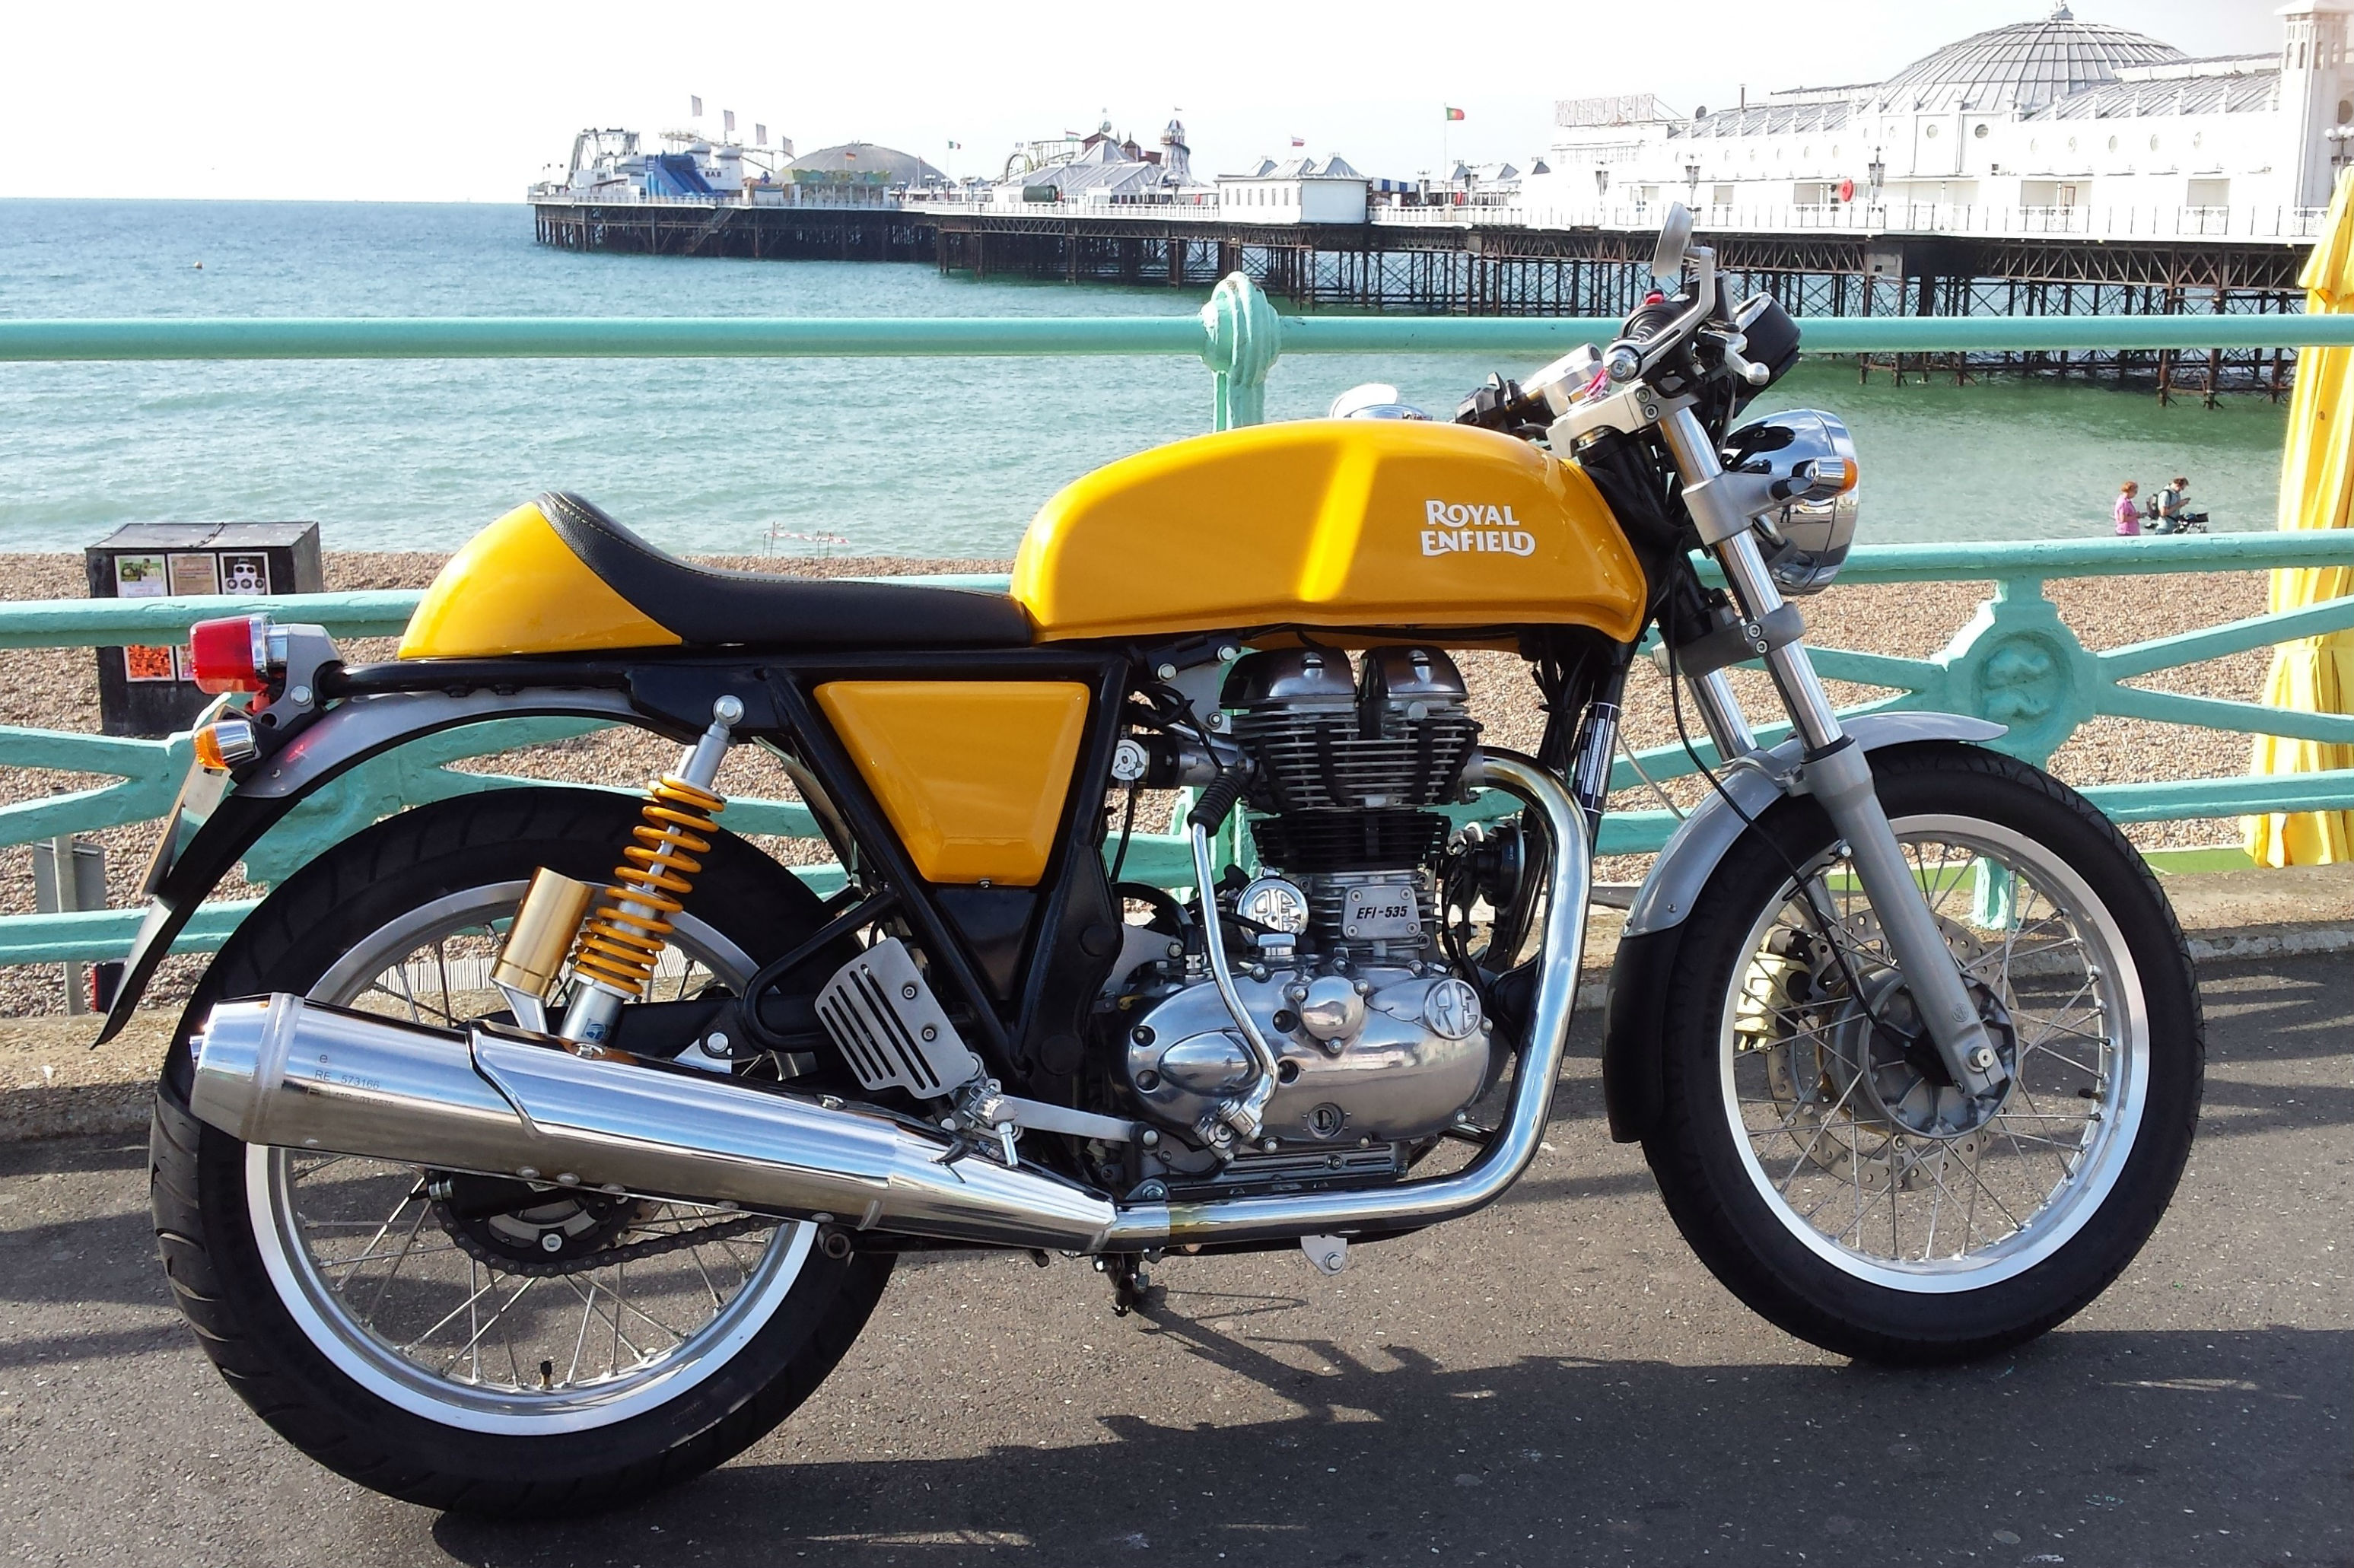 Video review: Royal Enfield Continental GT road test